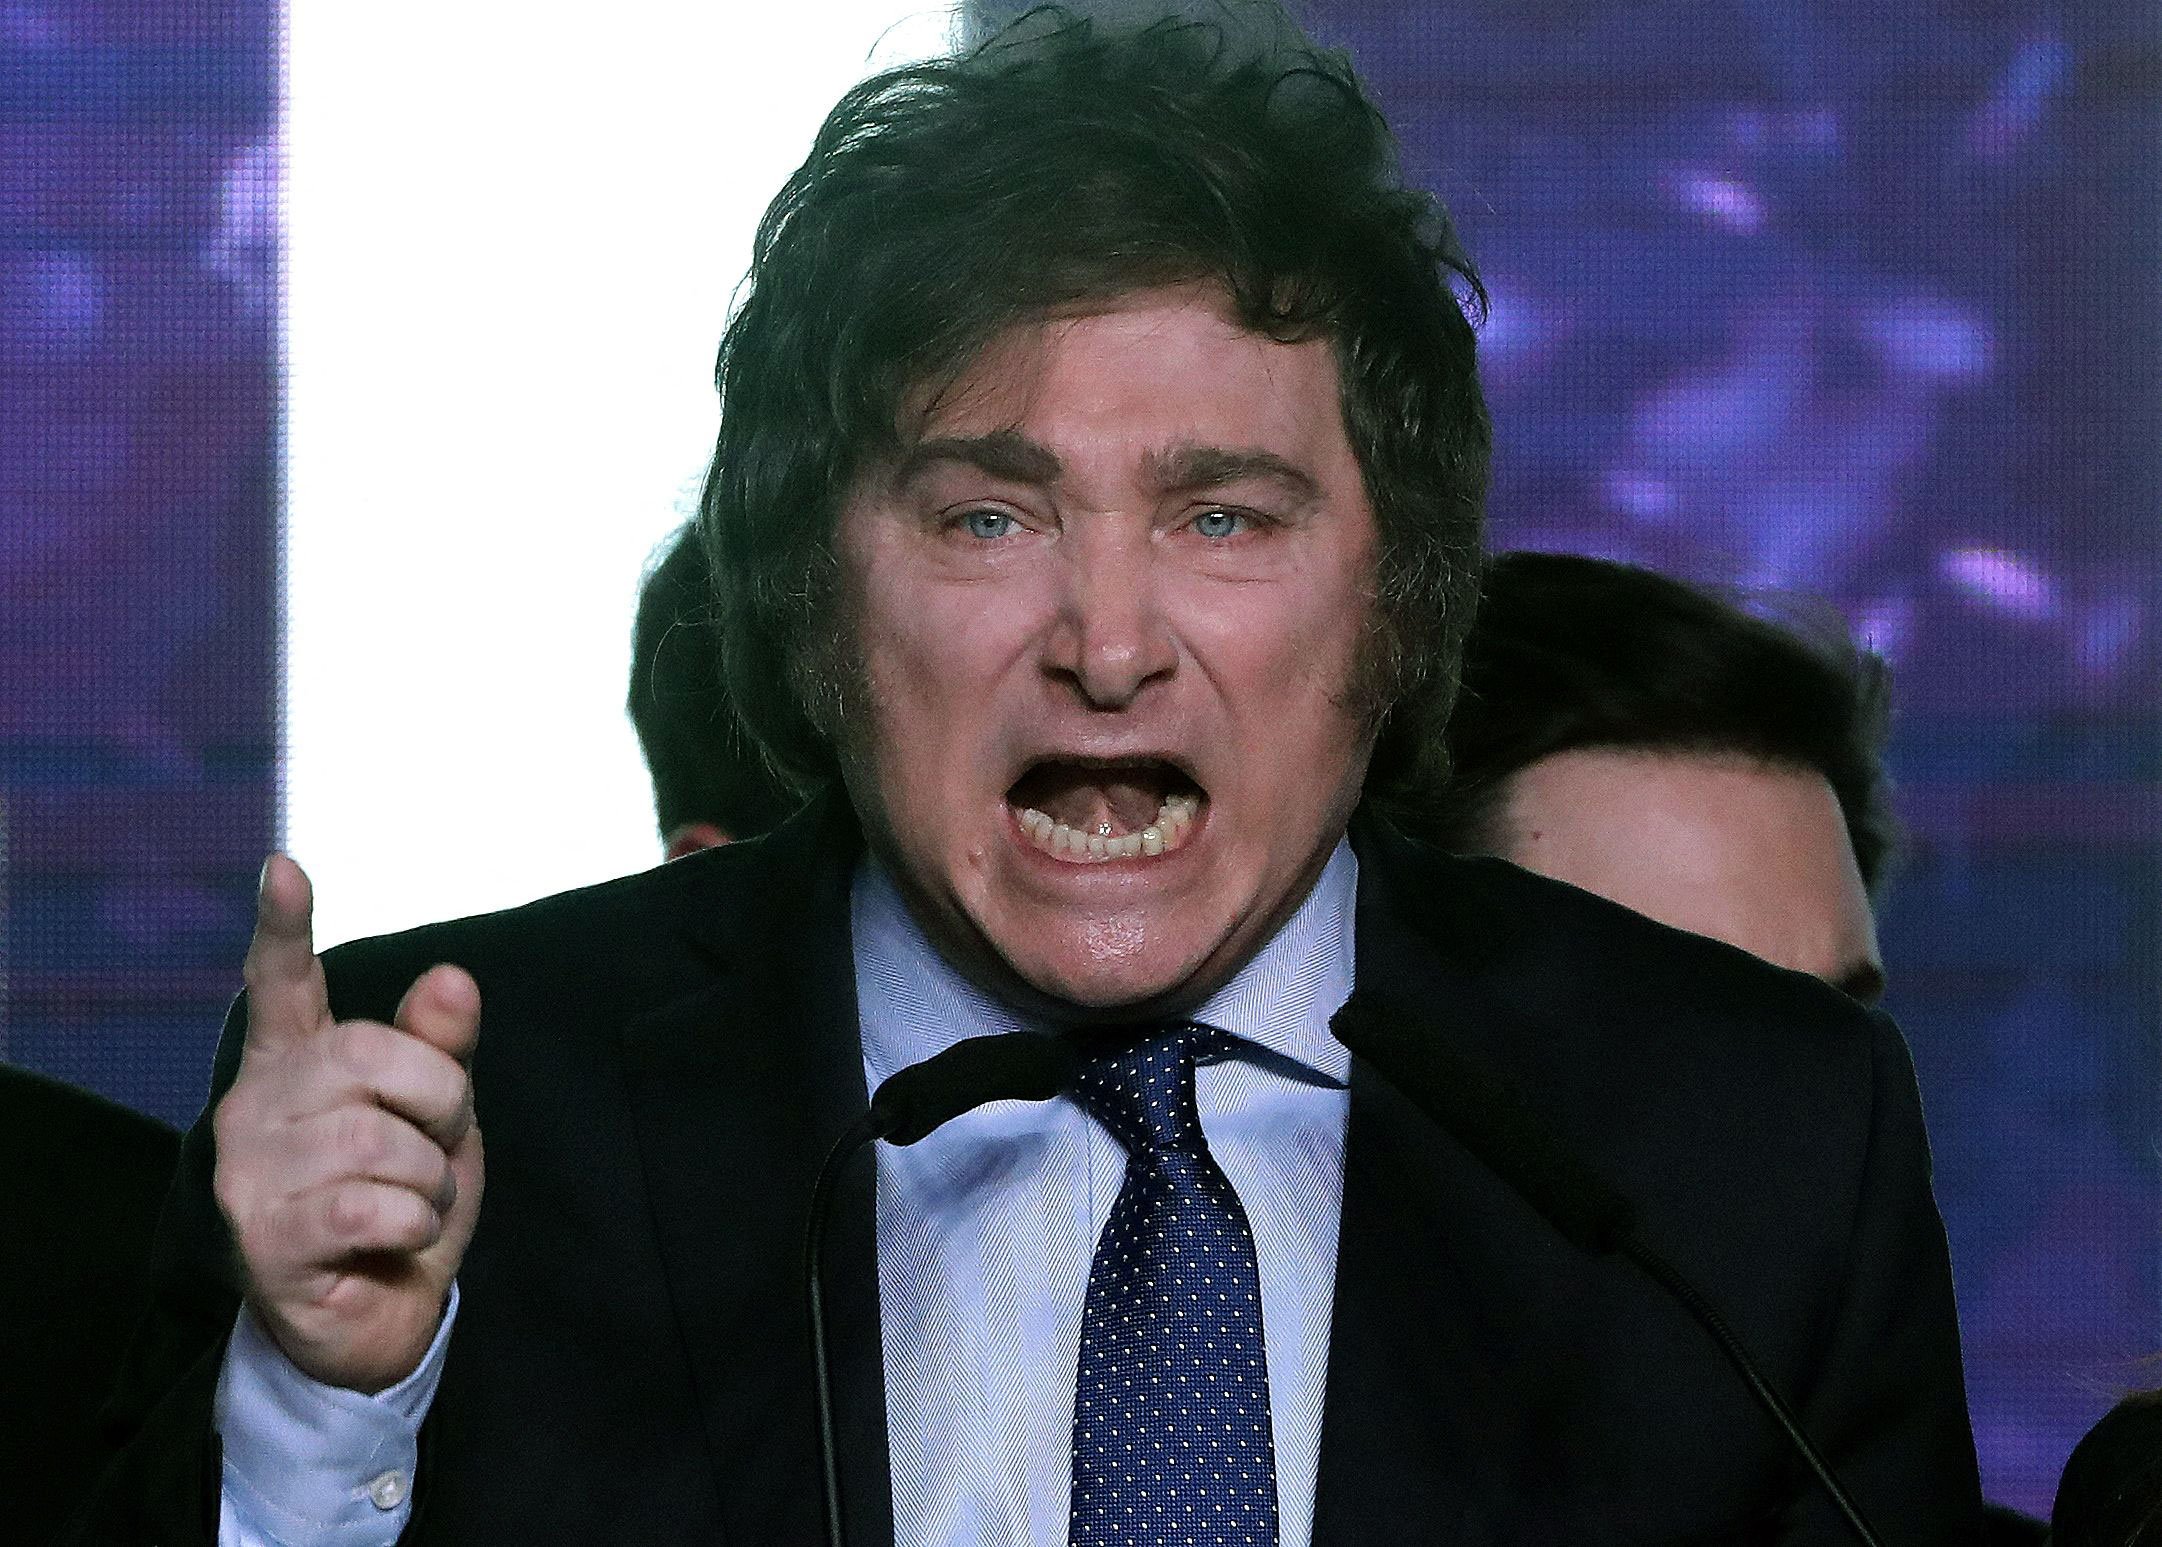 Argentina’s Presidential Primary Winner Has Vowed to “Chainsaw” Public